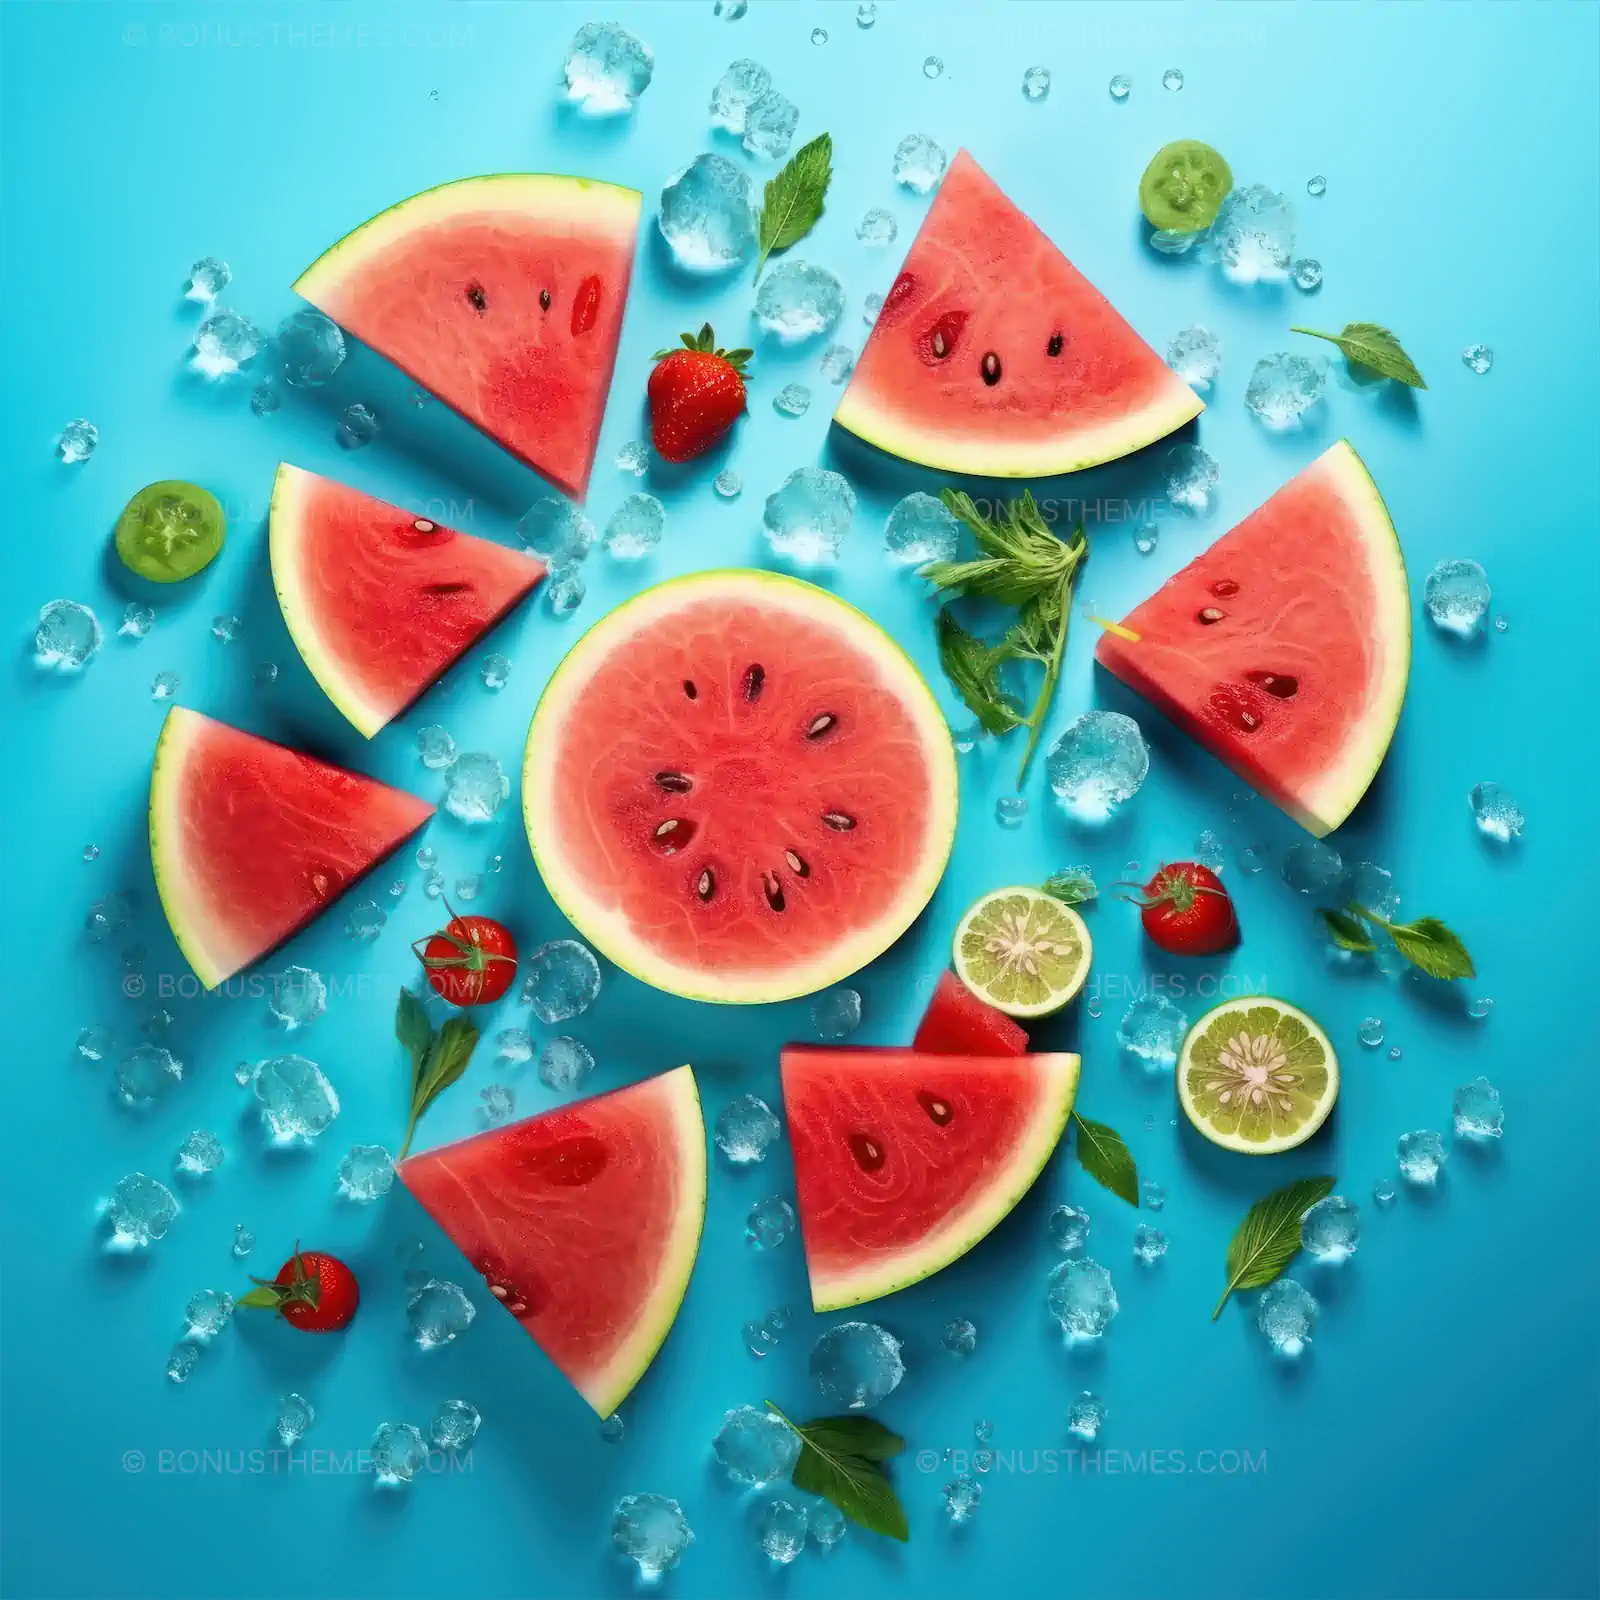 Watermelon slices with strawberries from top view